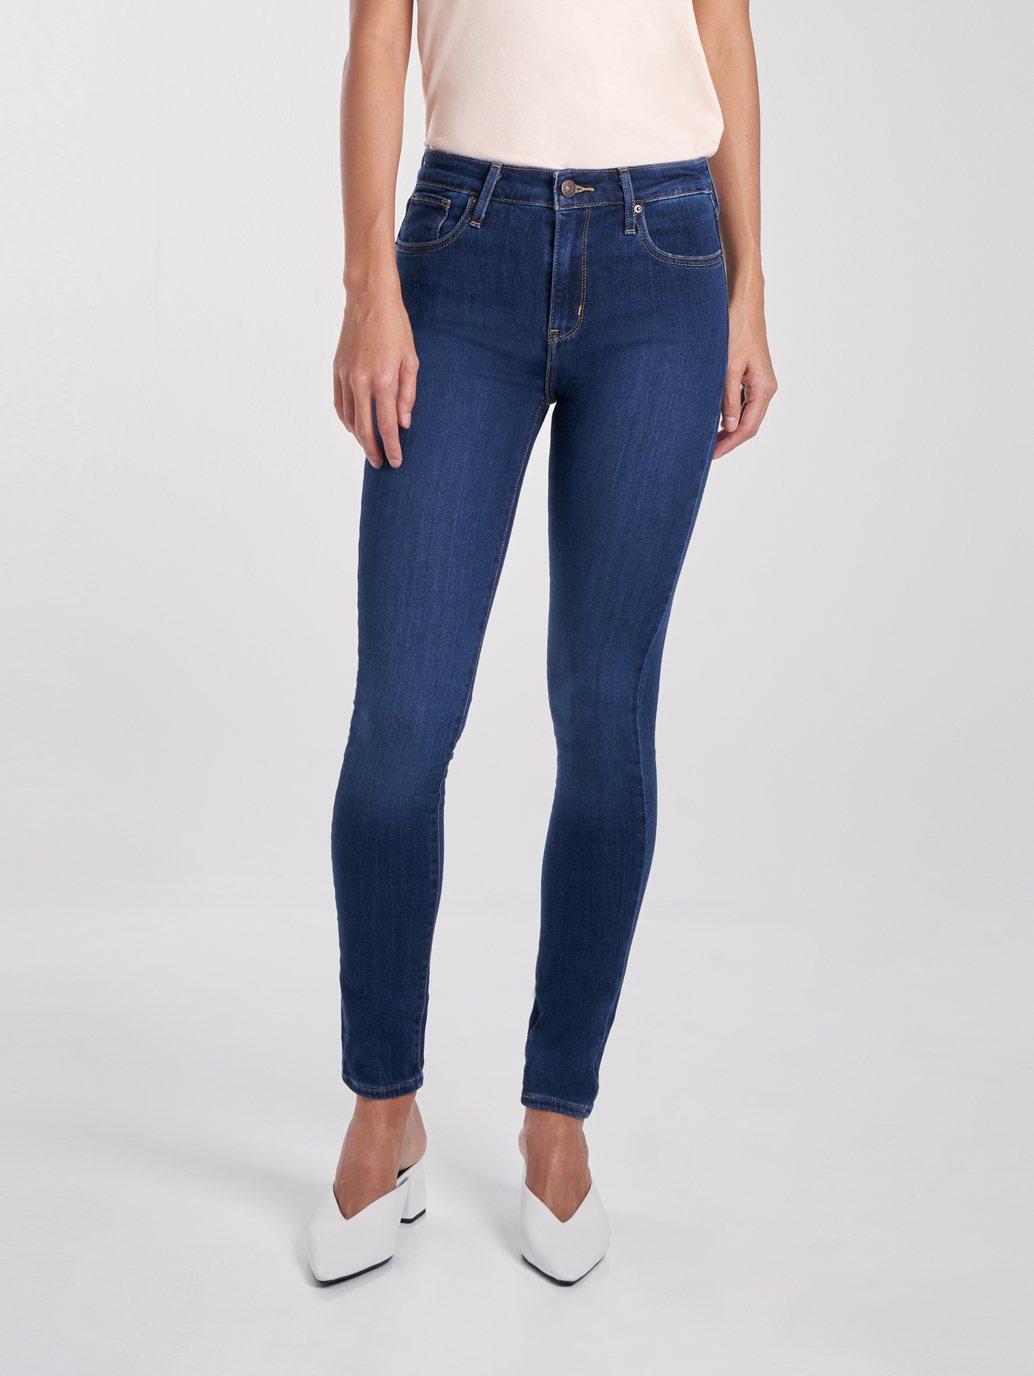 Buy Levi’s® Women's 721 High-Waisted Skinny Jeans | Levis® Official ...